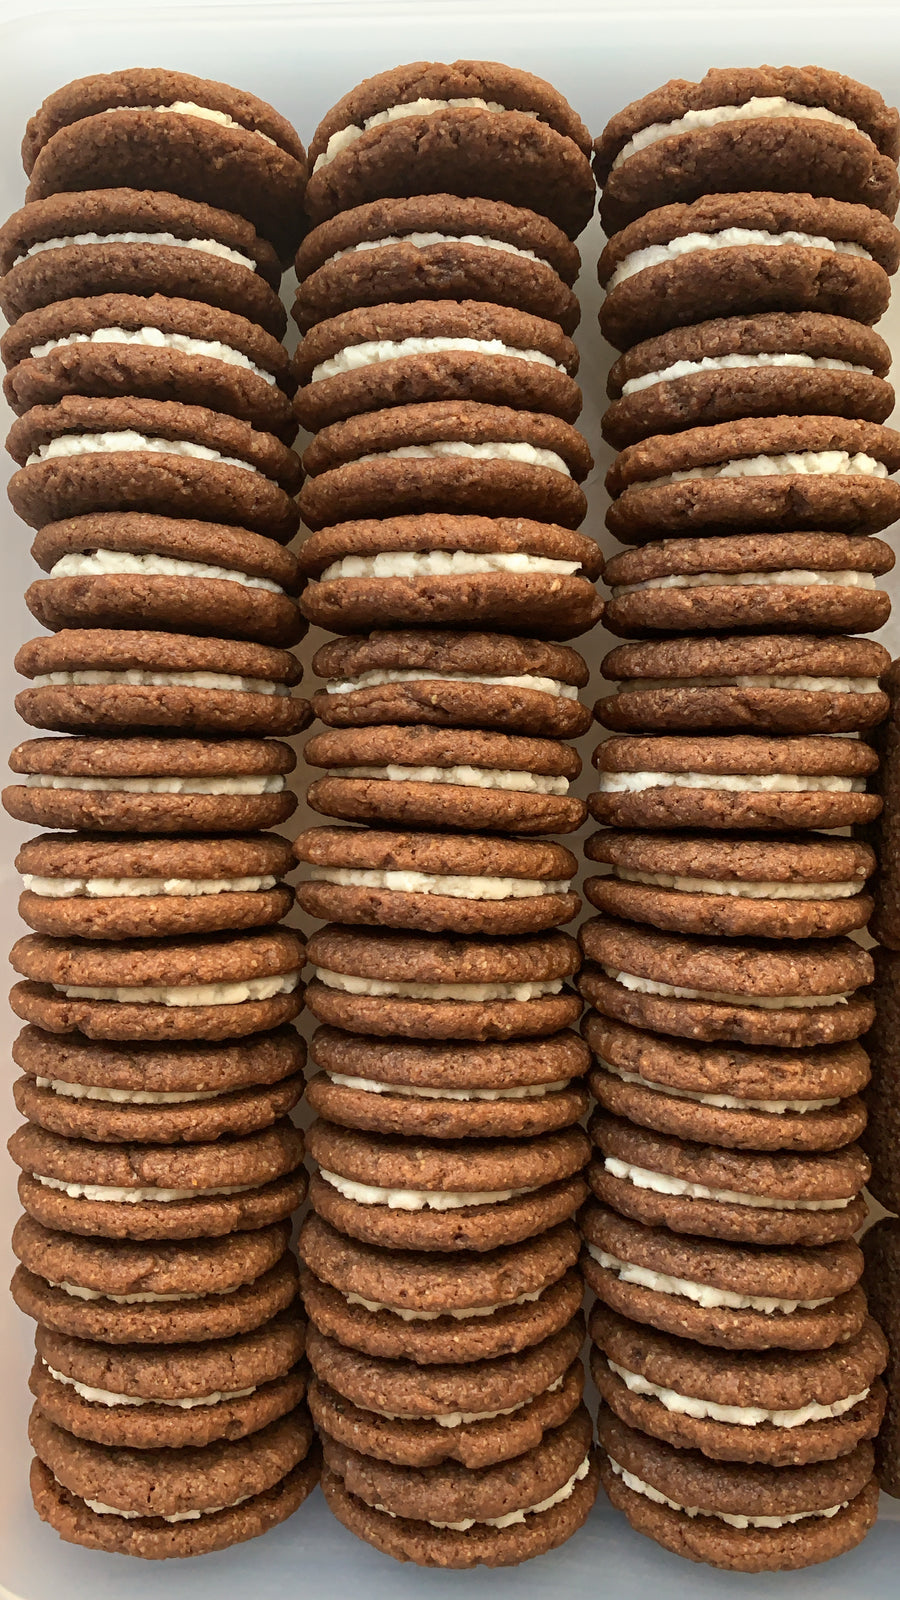 BAKED AF - Oatmeal Creme Pies